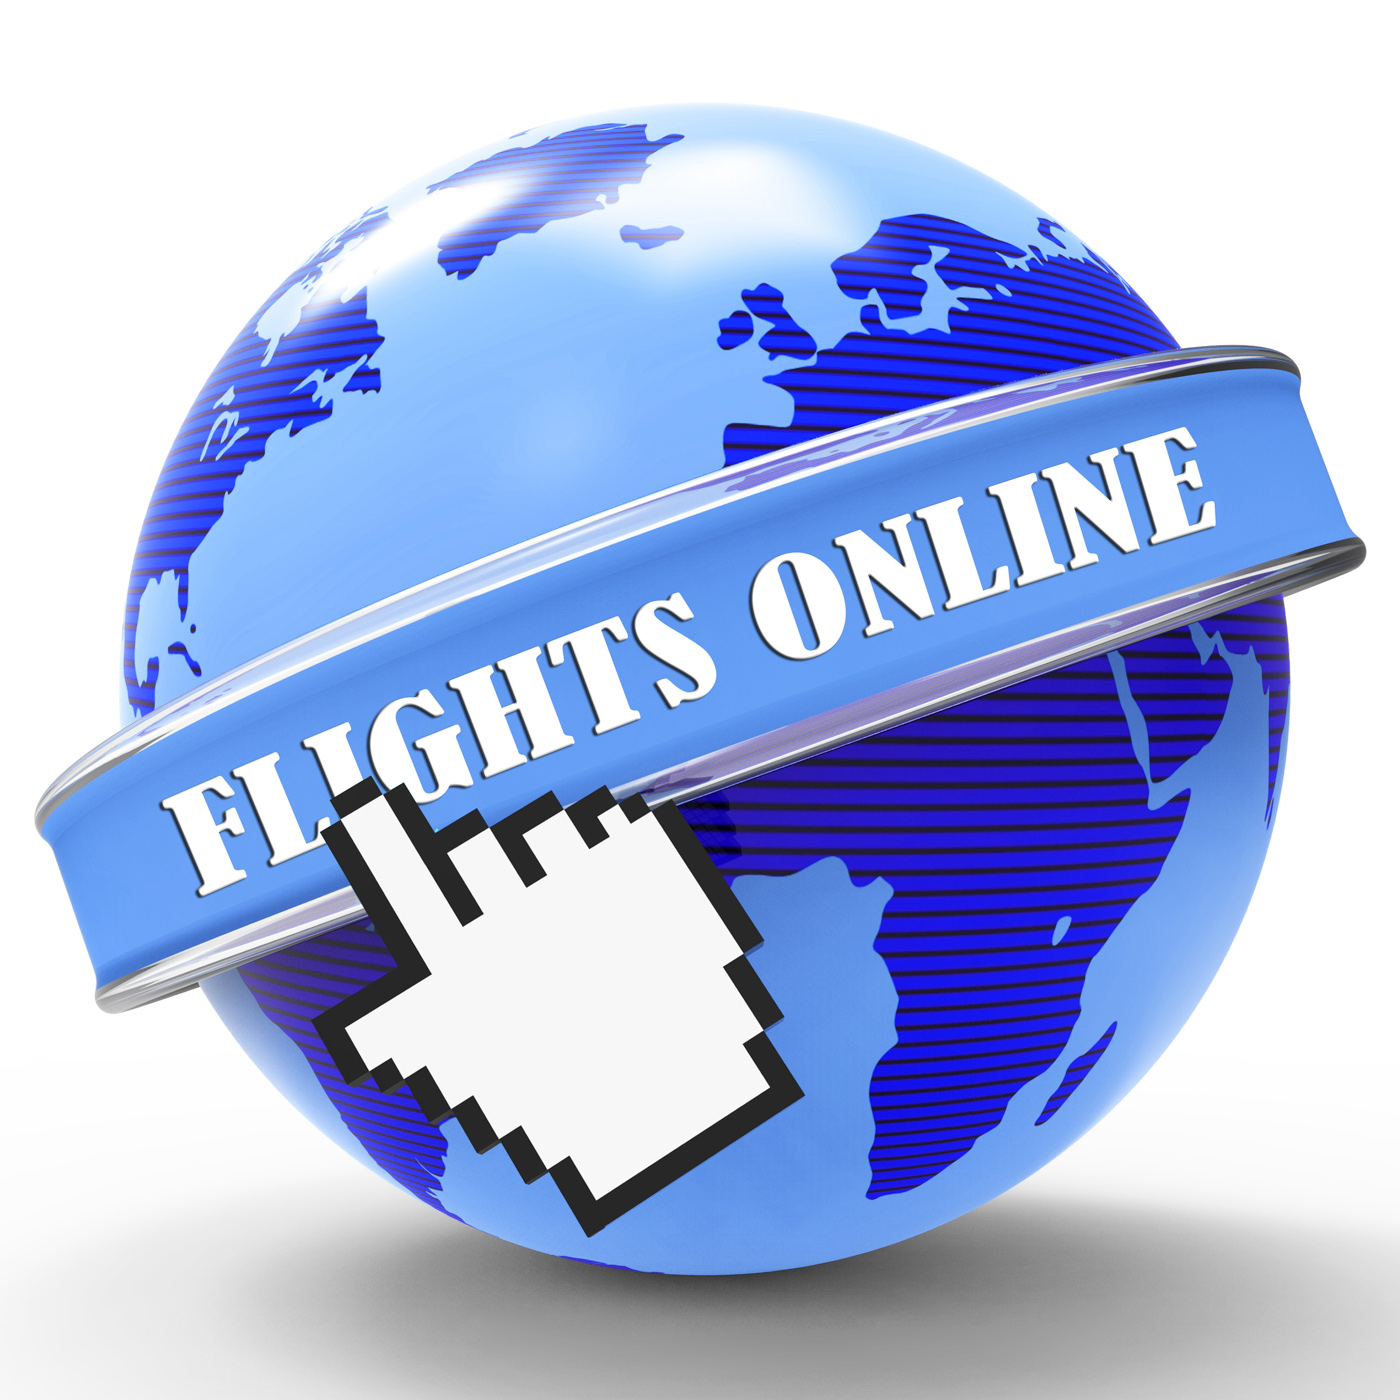 Flights Online Shows Airplane Net And Fly, Aeroplane, Network, Websites, Website, HQ Photo